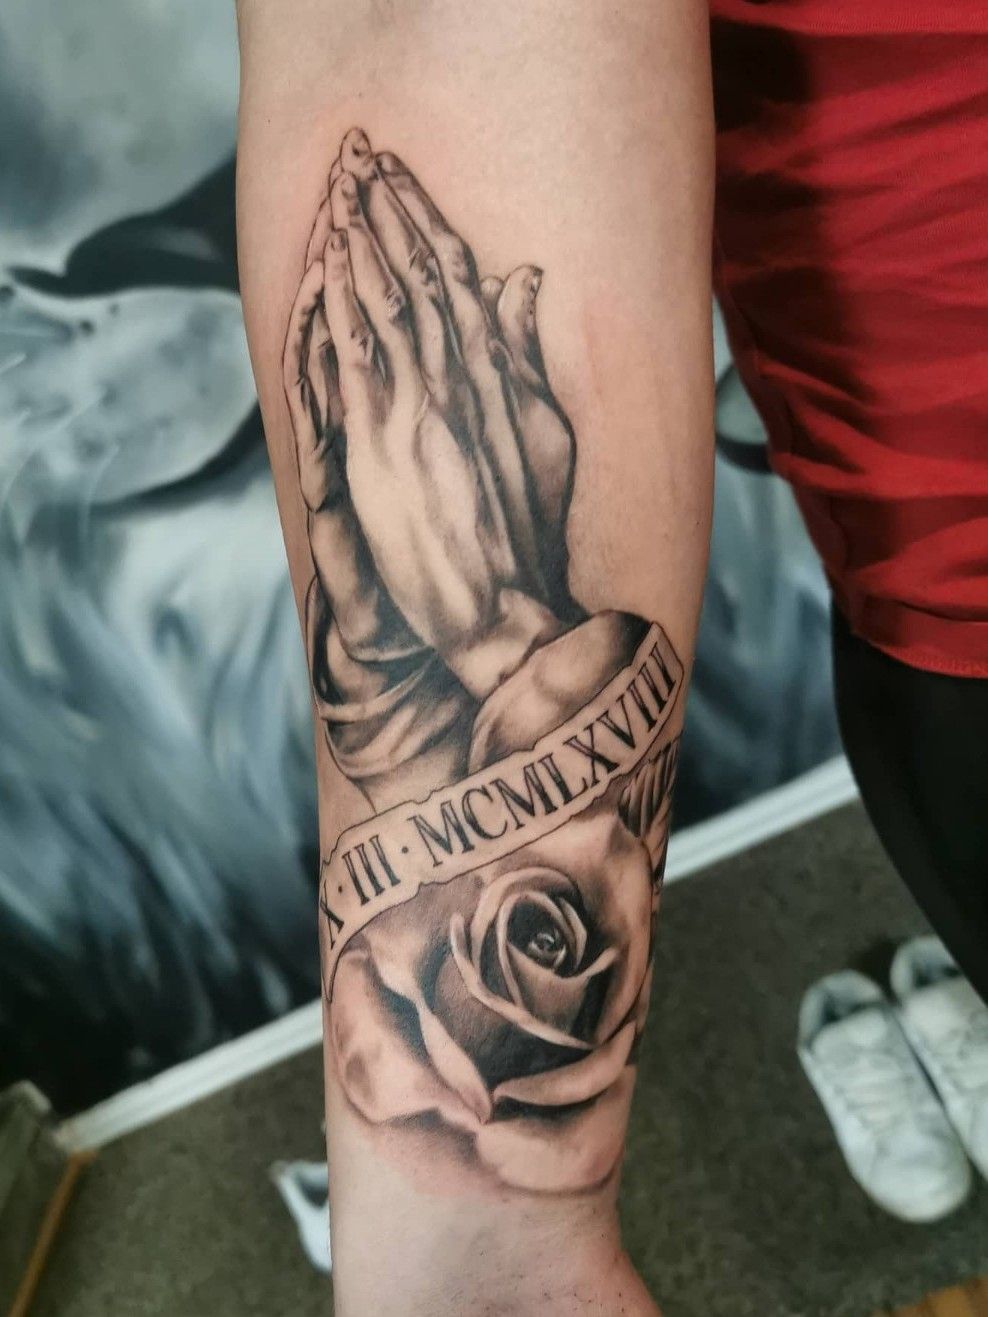 Praying Hands Tattoos for Men  Hand tattoos for guys Trendy tattoos  Tattoos for guys